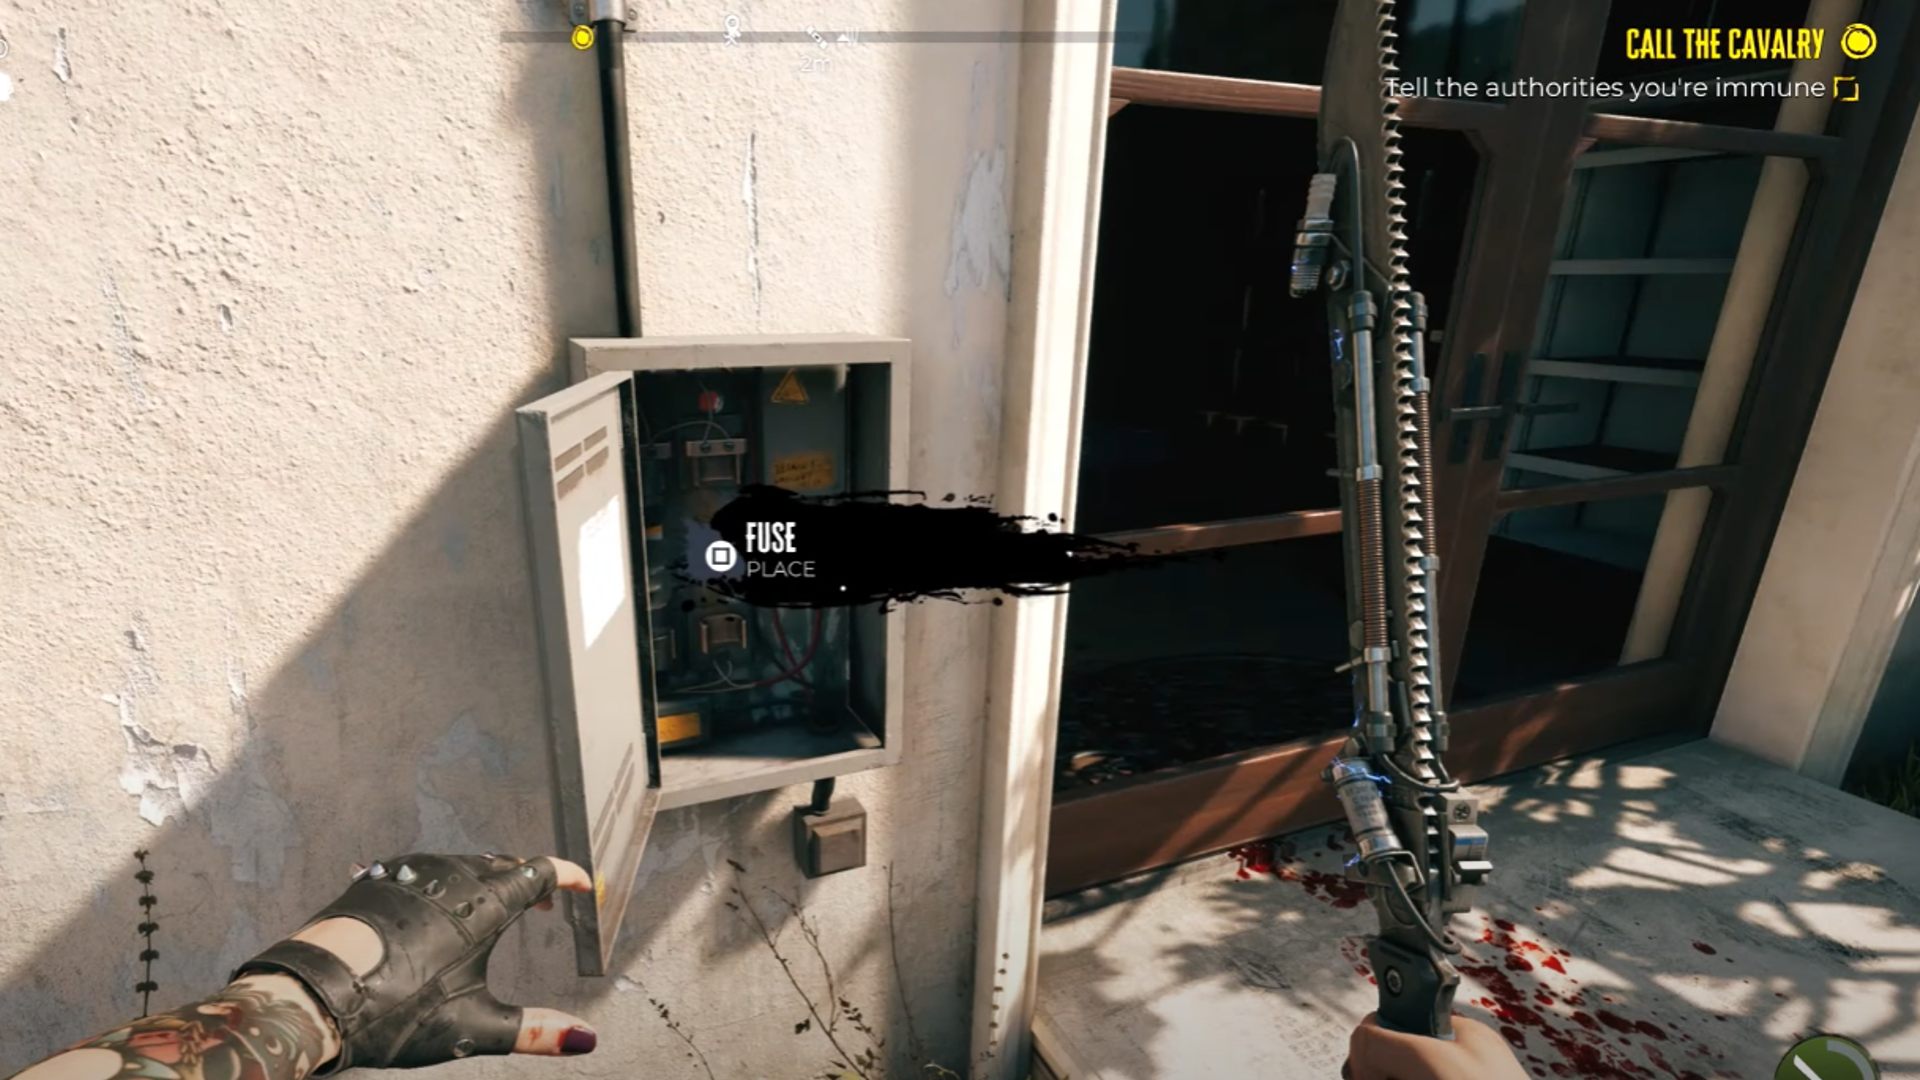 Dead Island 2 Fuses: A fuse box can be seen